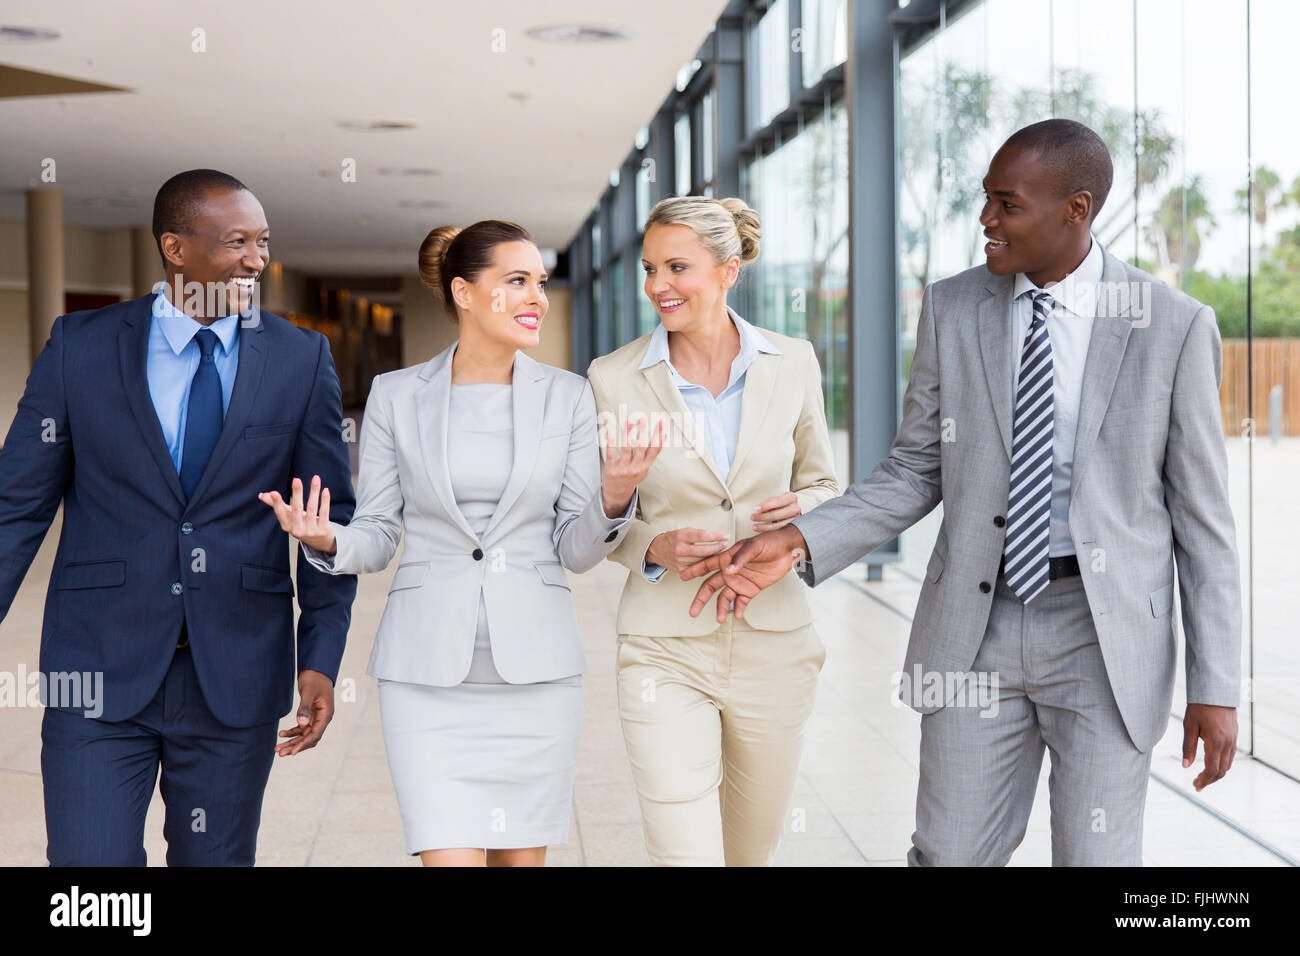 Belle société multiraciale businesspeople walking together in office building Banque D'Images